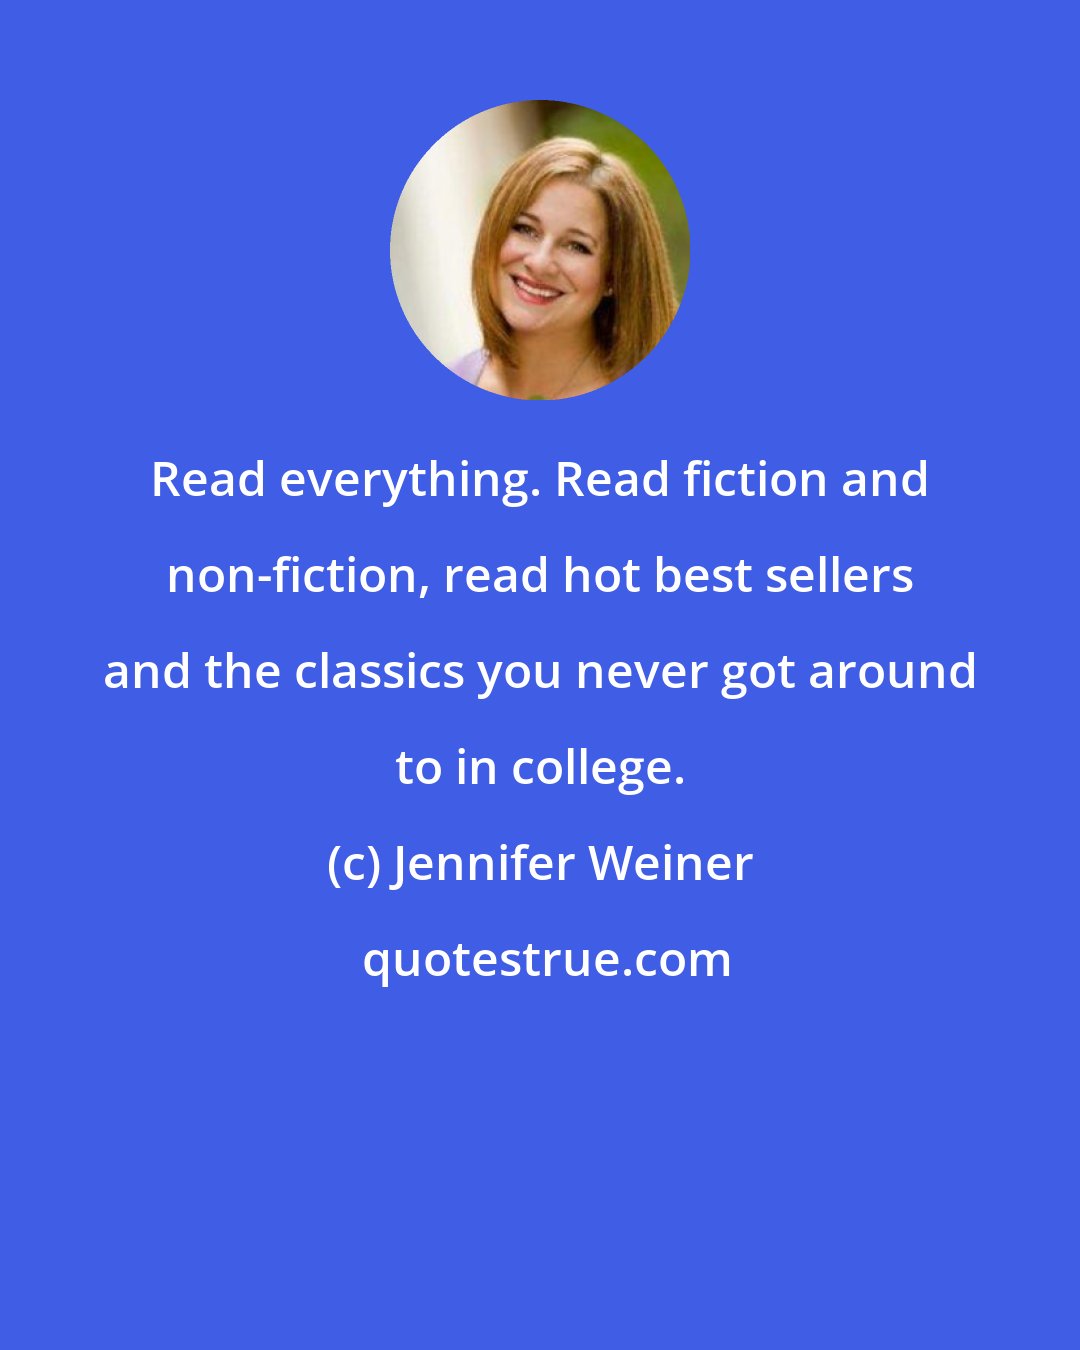 Jennifer Weiner: Read everything. Read fiction and non-fiction, read hot best sellers and the classics you never got around to in college.